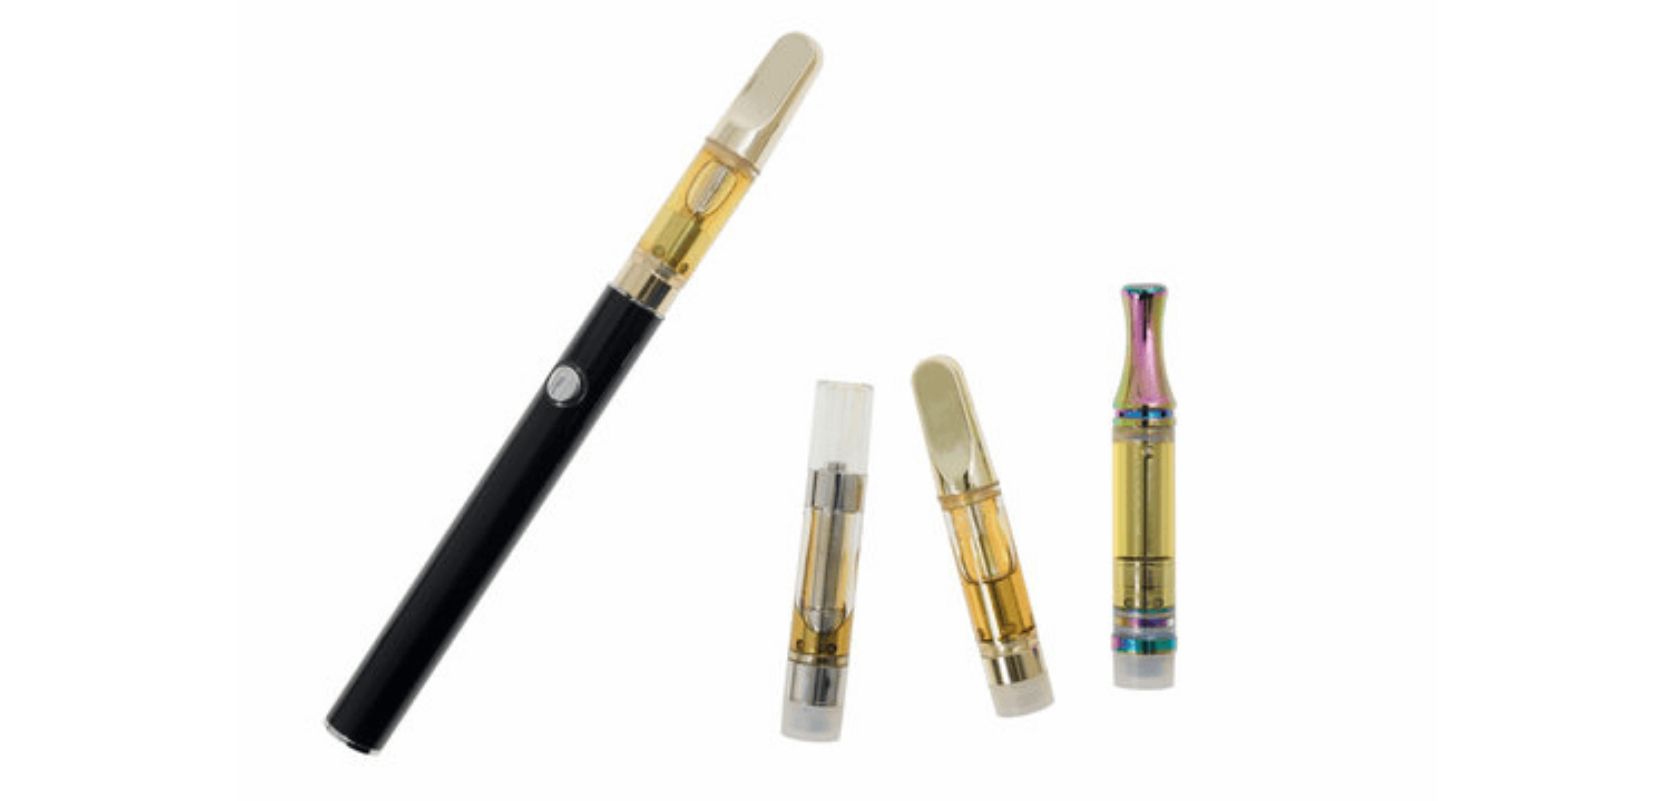 Wax pens are compact, almost resembling a pen, that you can carry in your pocket or bag. 